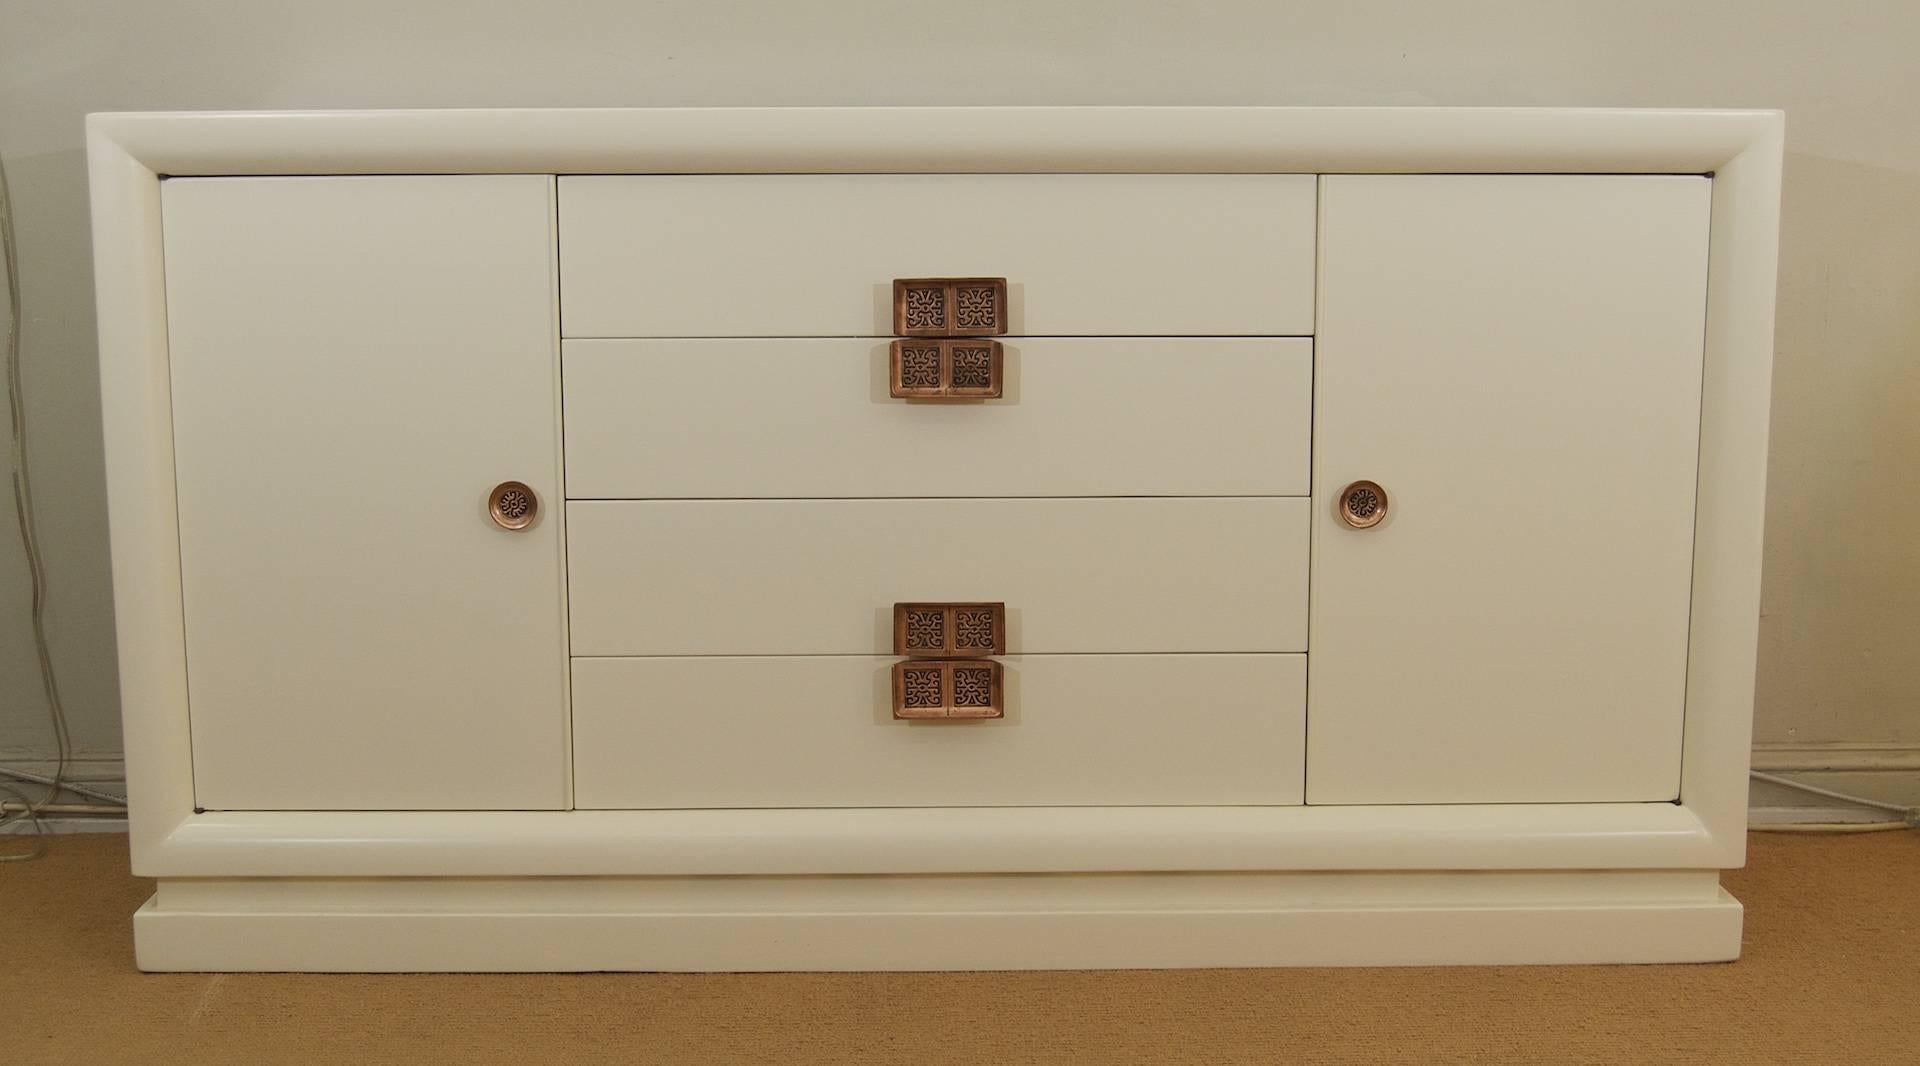 A large white lacquered dresser with intricate Asian inspired copper tone pulls. The dresser has four center drawers and two outer cabinets each with four interior drawers. Enough storage for the largest of wardrobes.